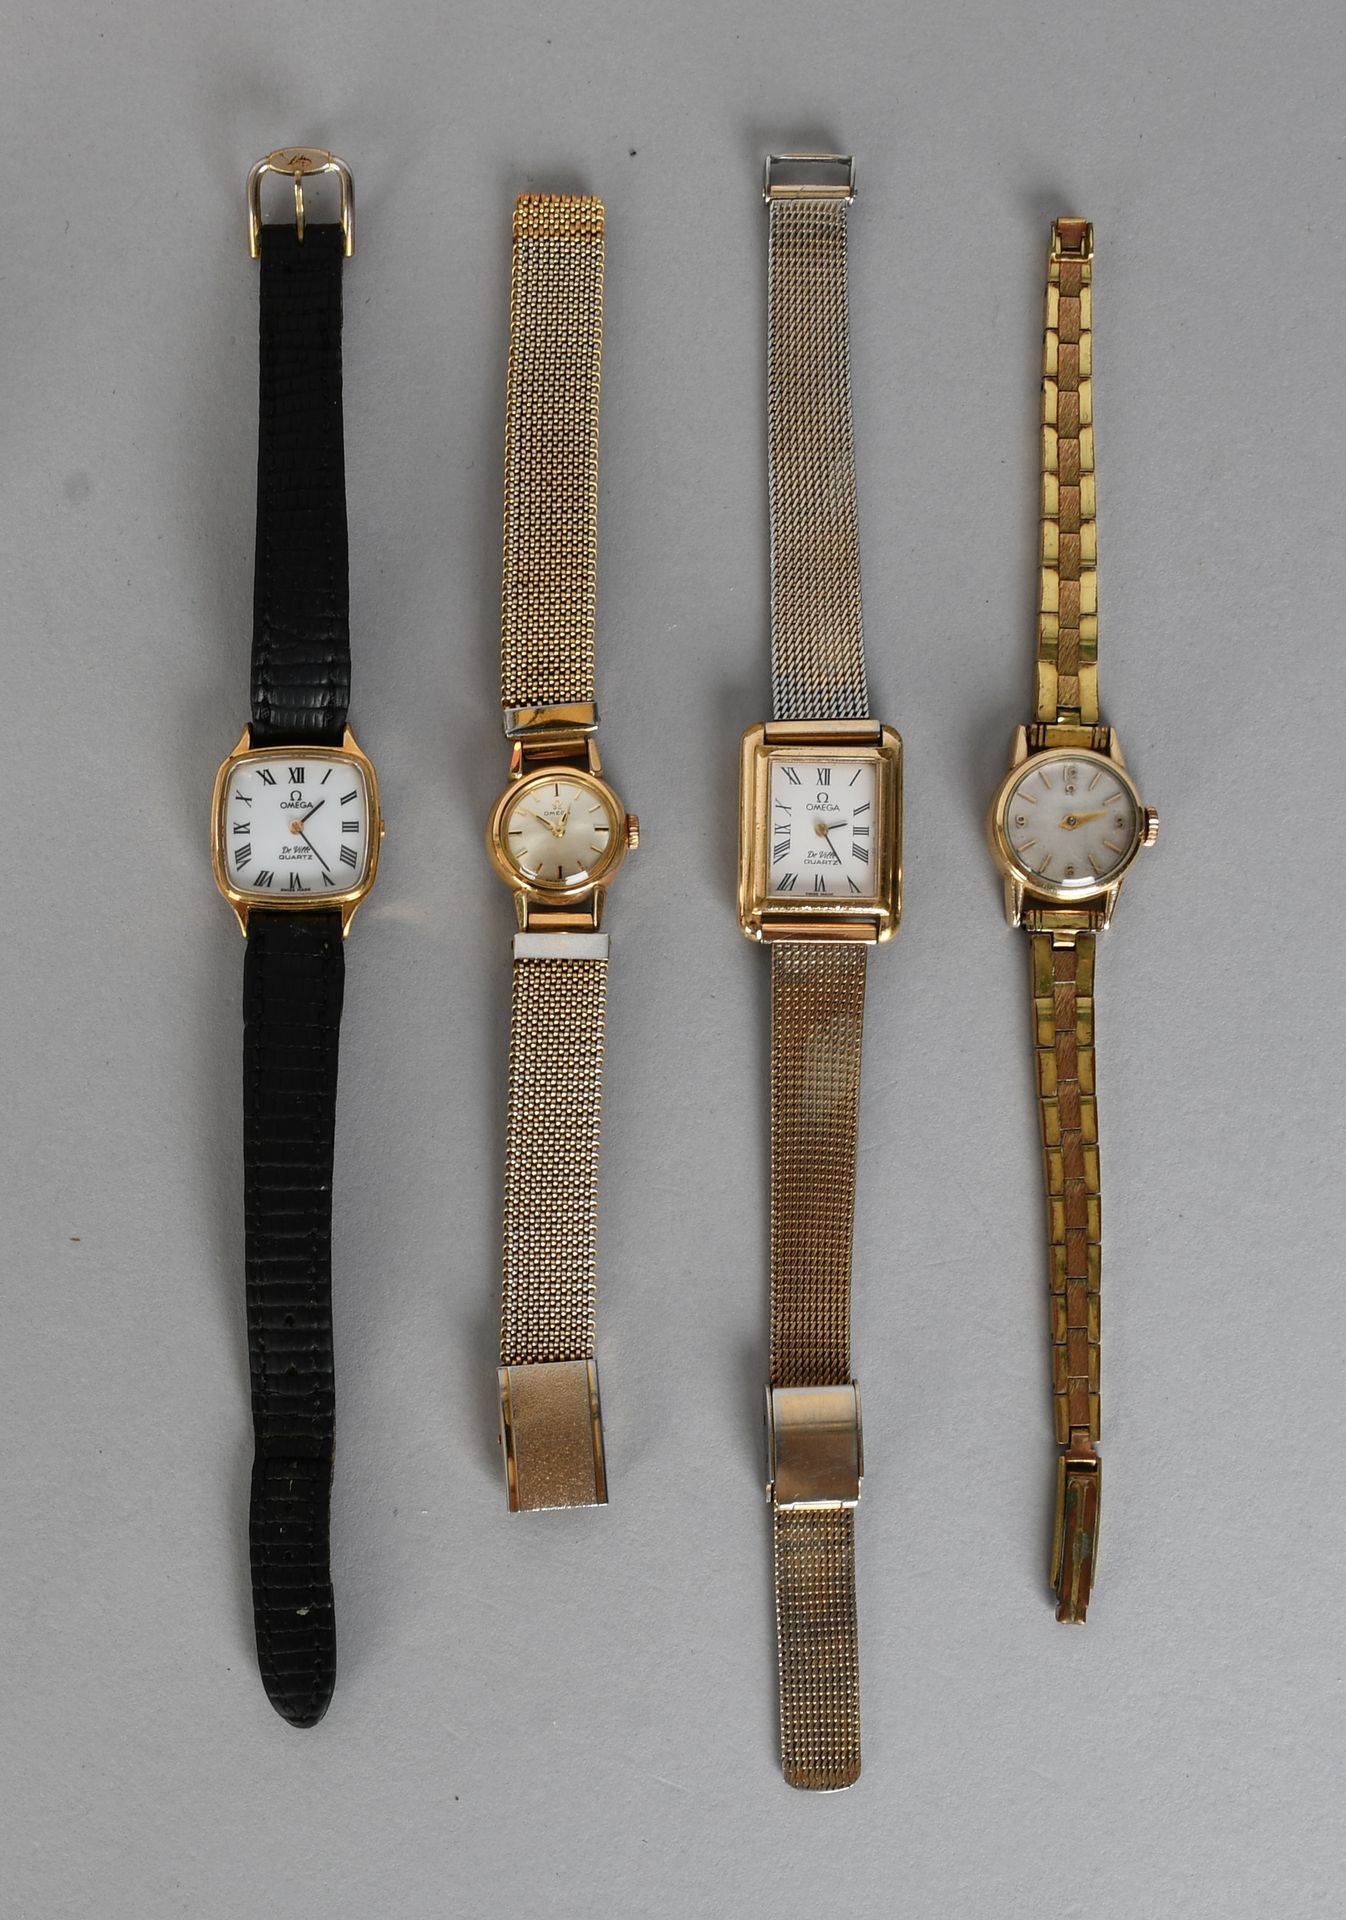 Null Jewel

Omega - Set of four vintage wrist watches.